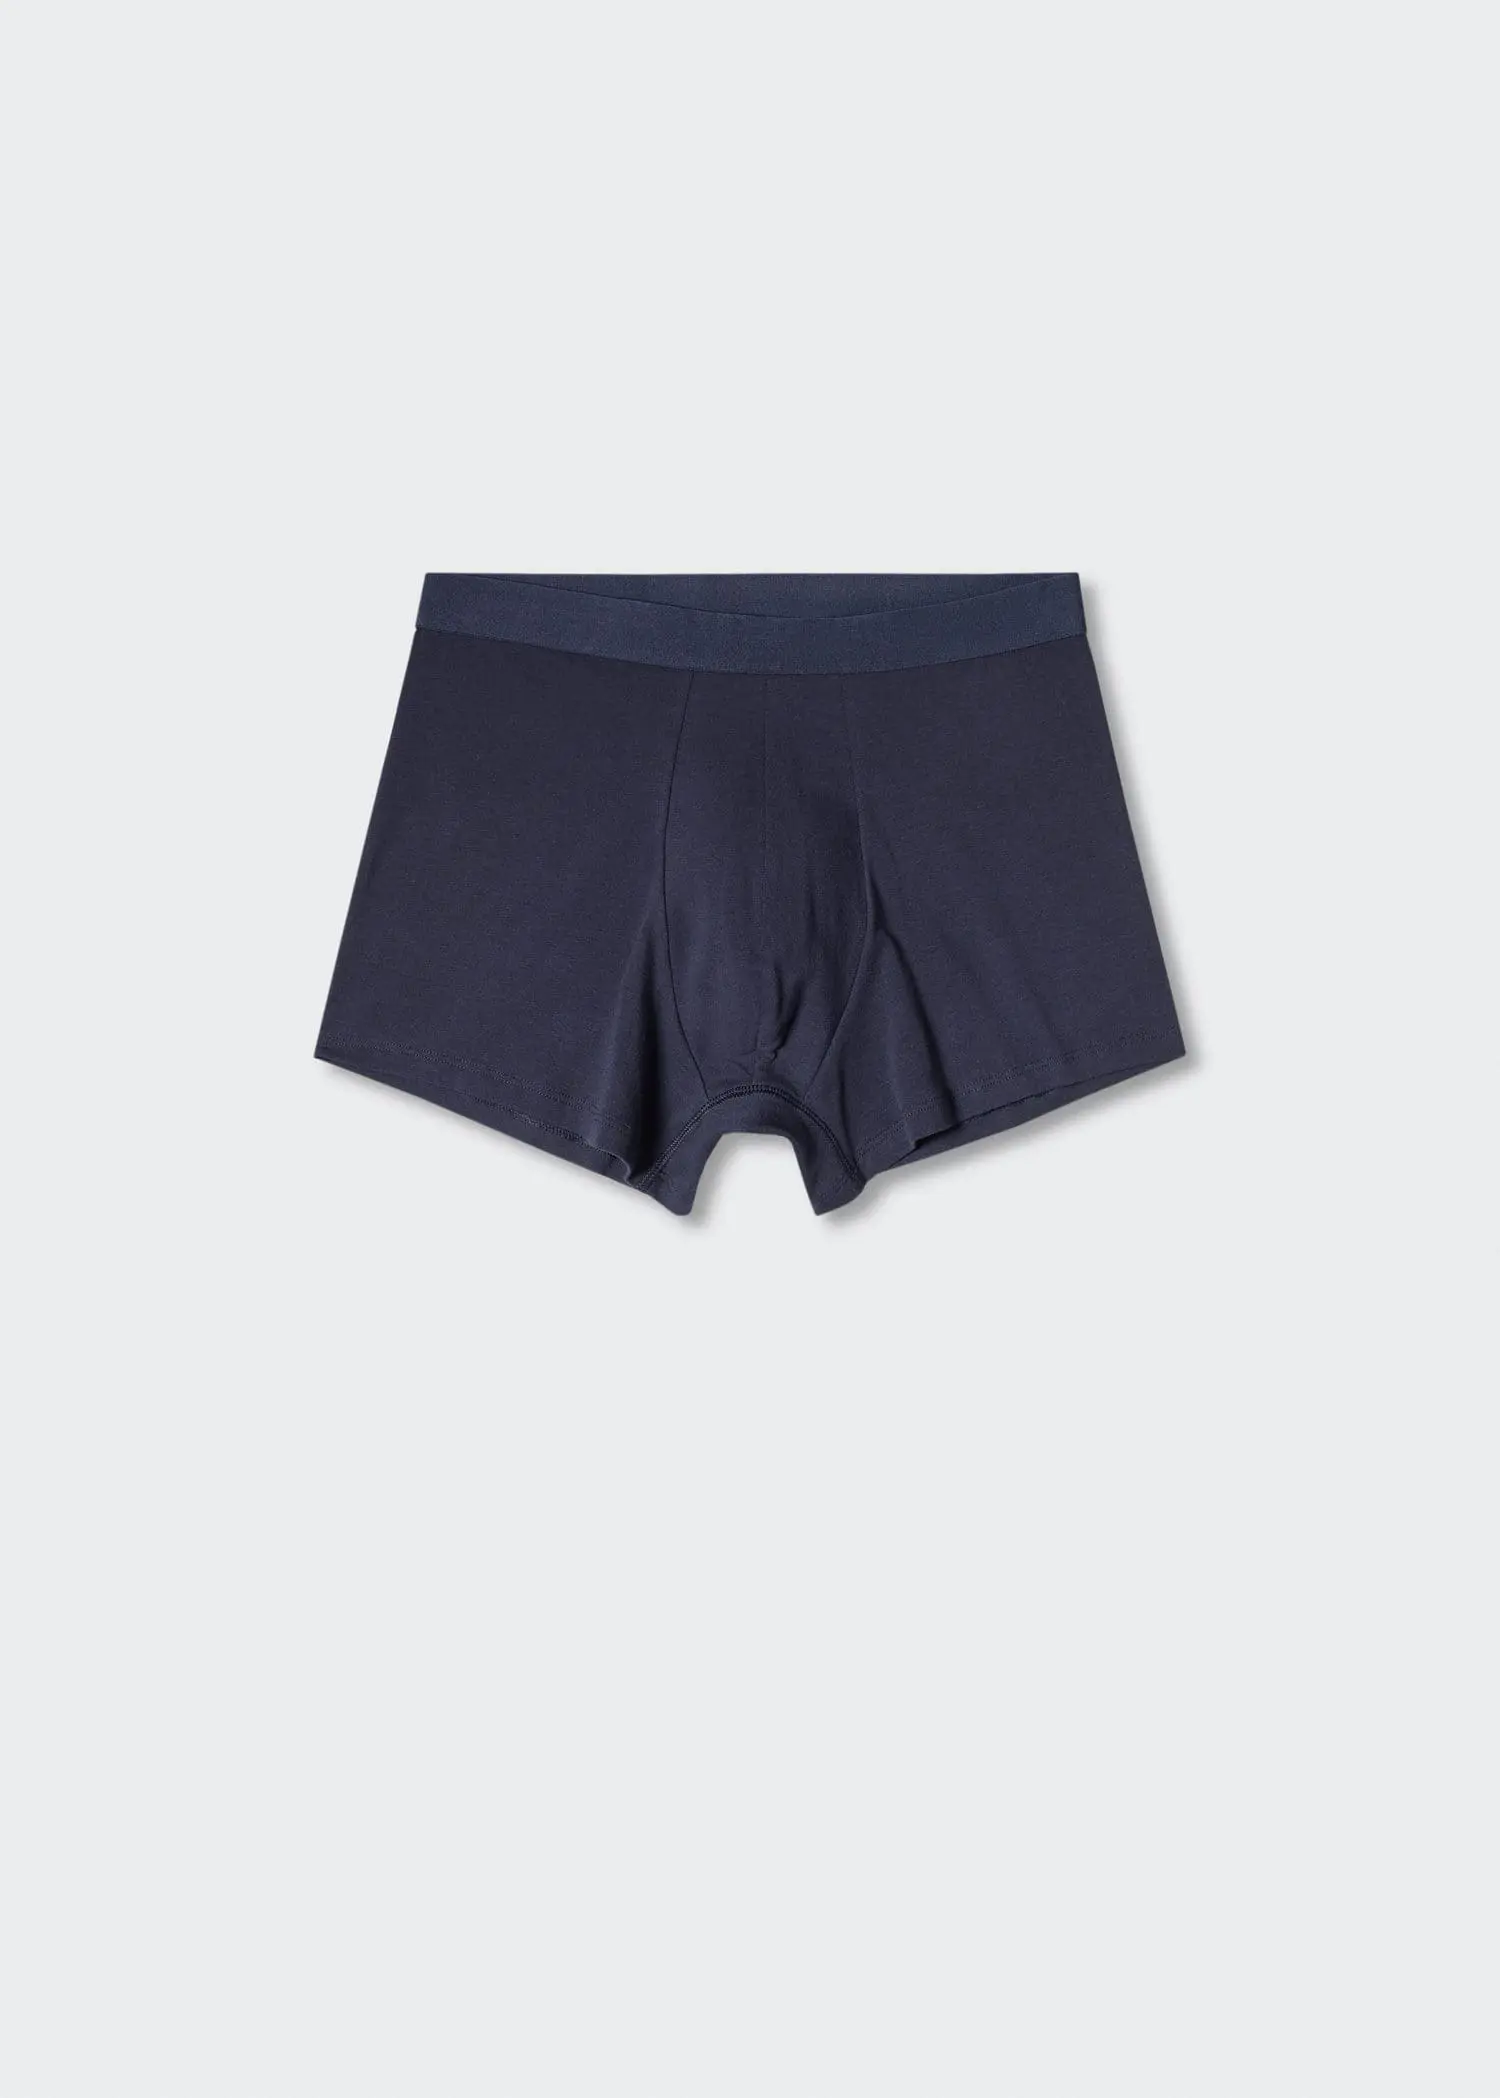 Mango 3-pack of blue cotton boxer shorts. a pair of underwear is shown on a white background. 